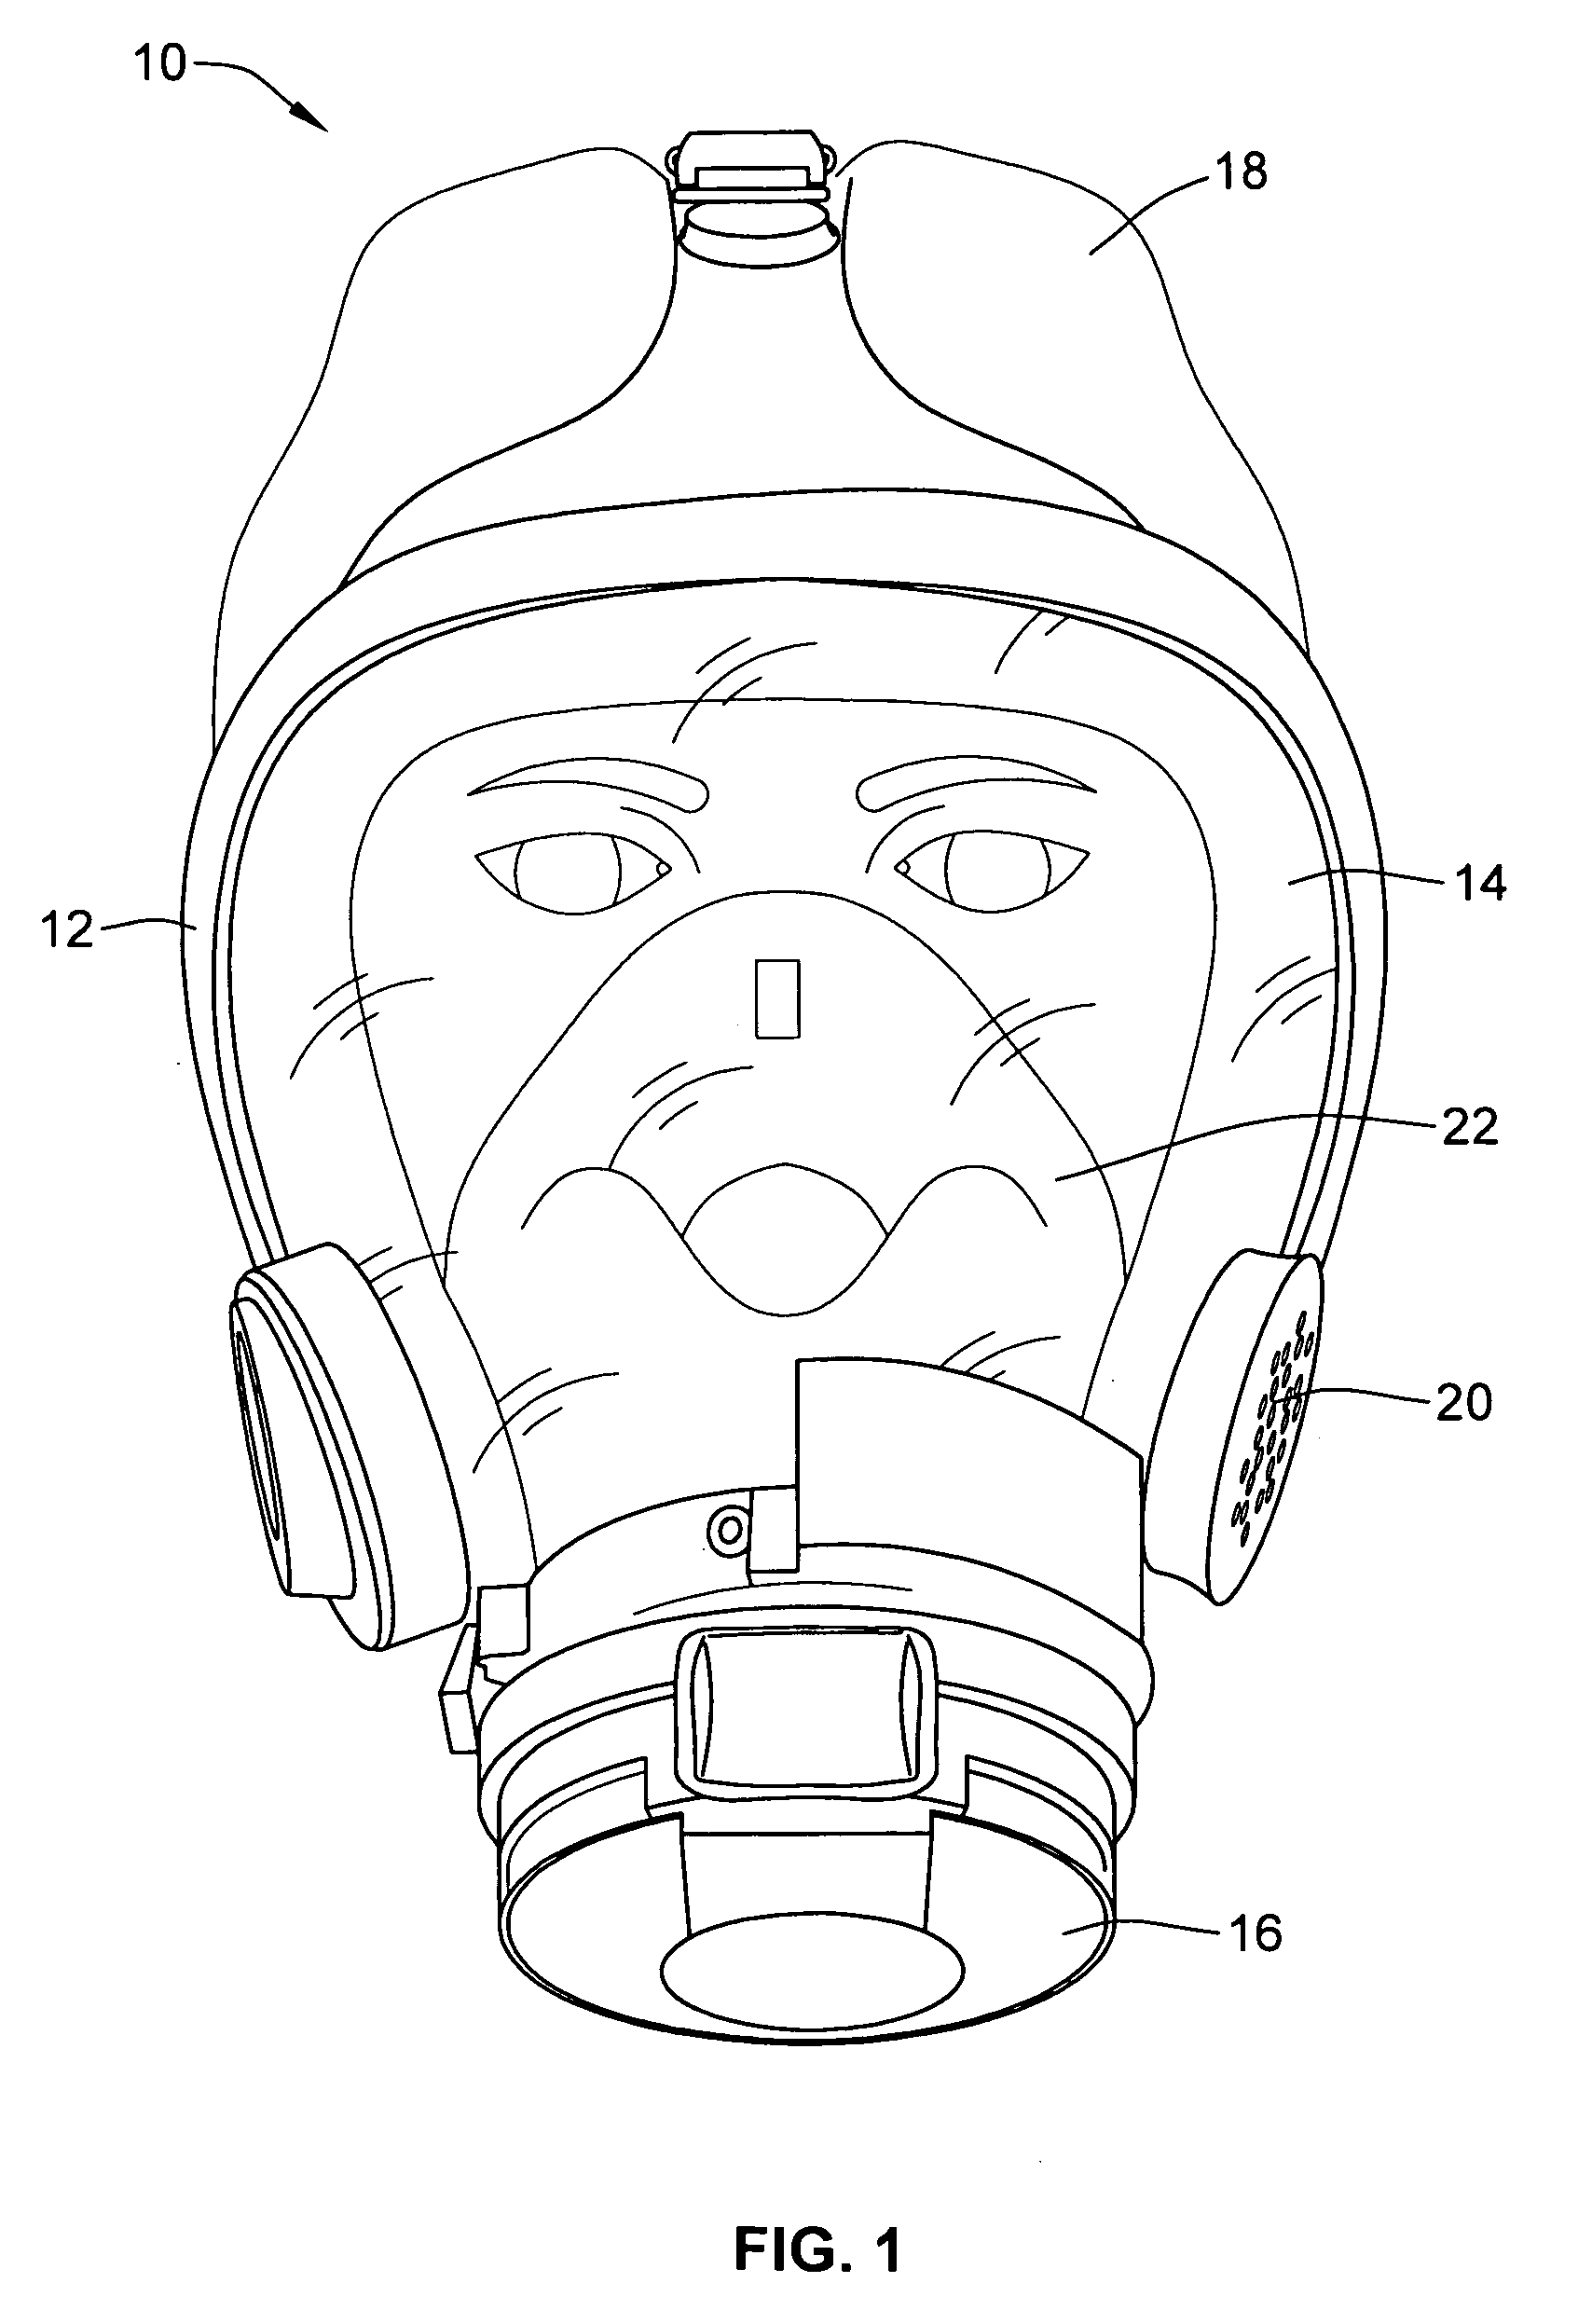 Face seals for respirators and method of manufacturing respirators